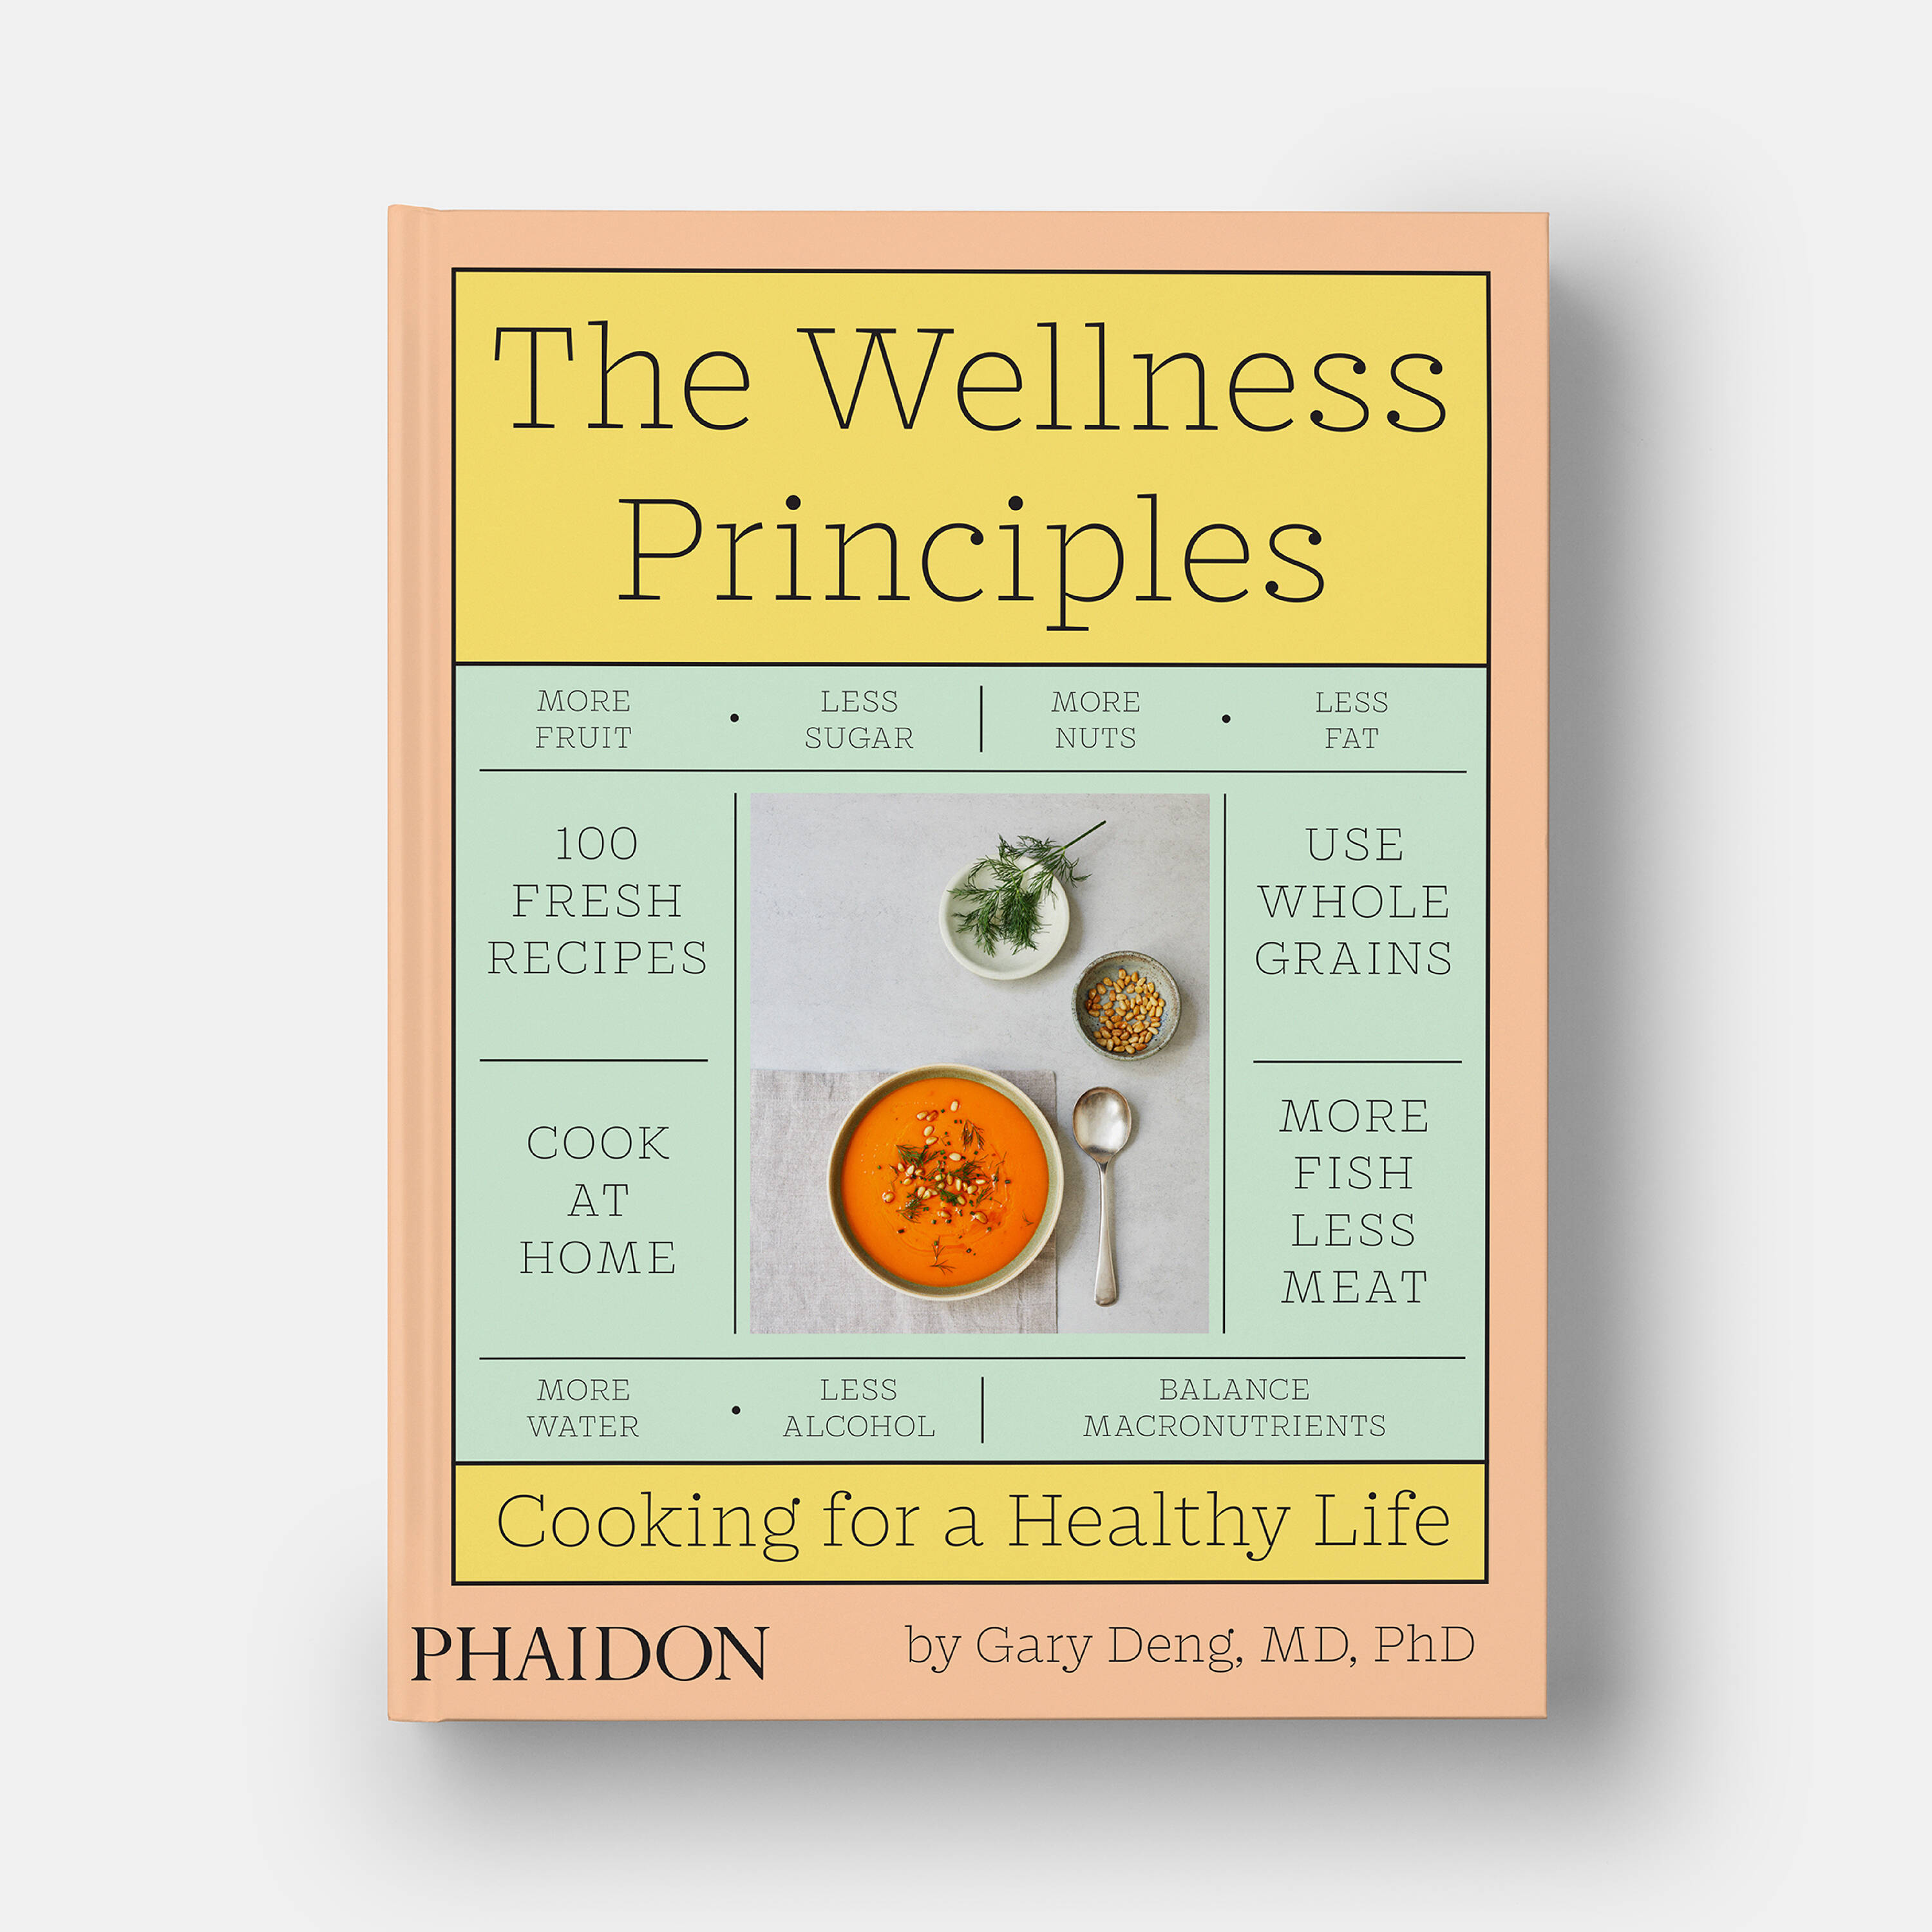 Try working this one Wellness Principle into your diet